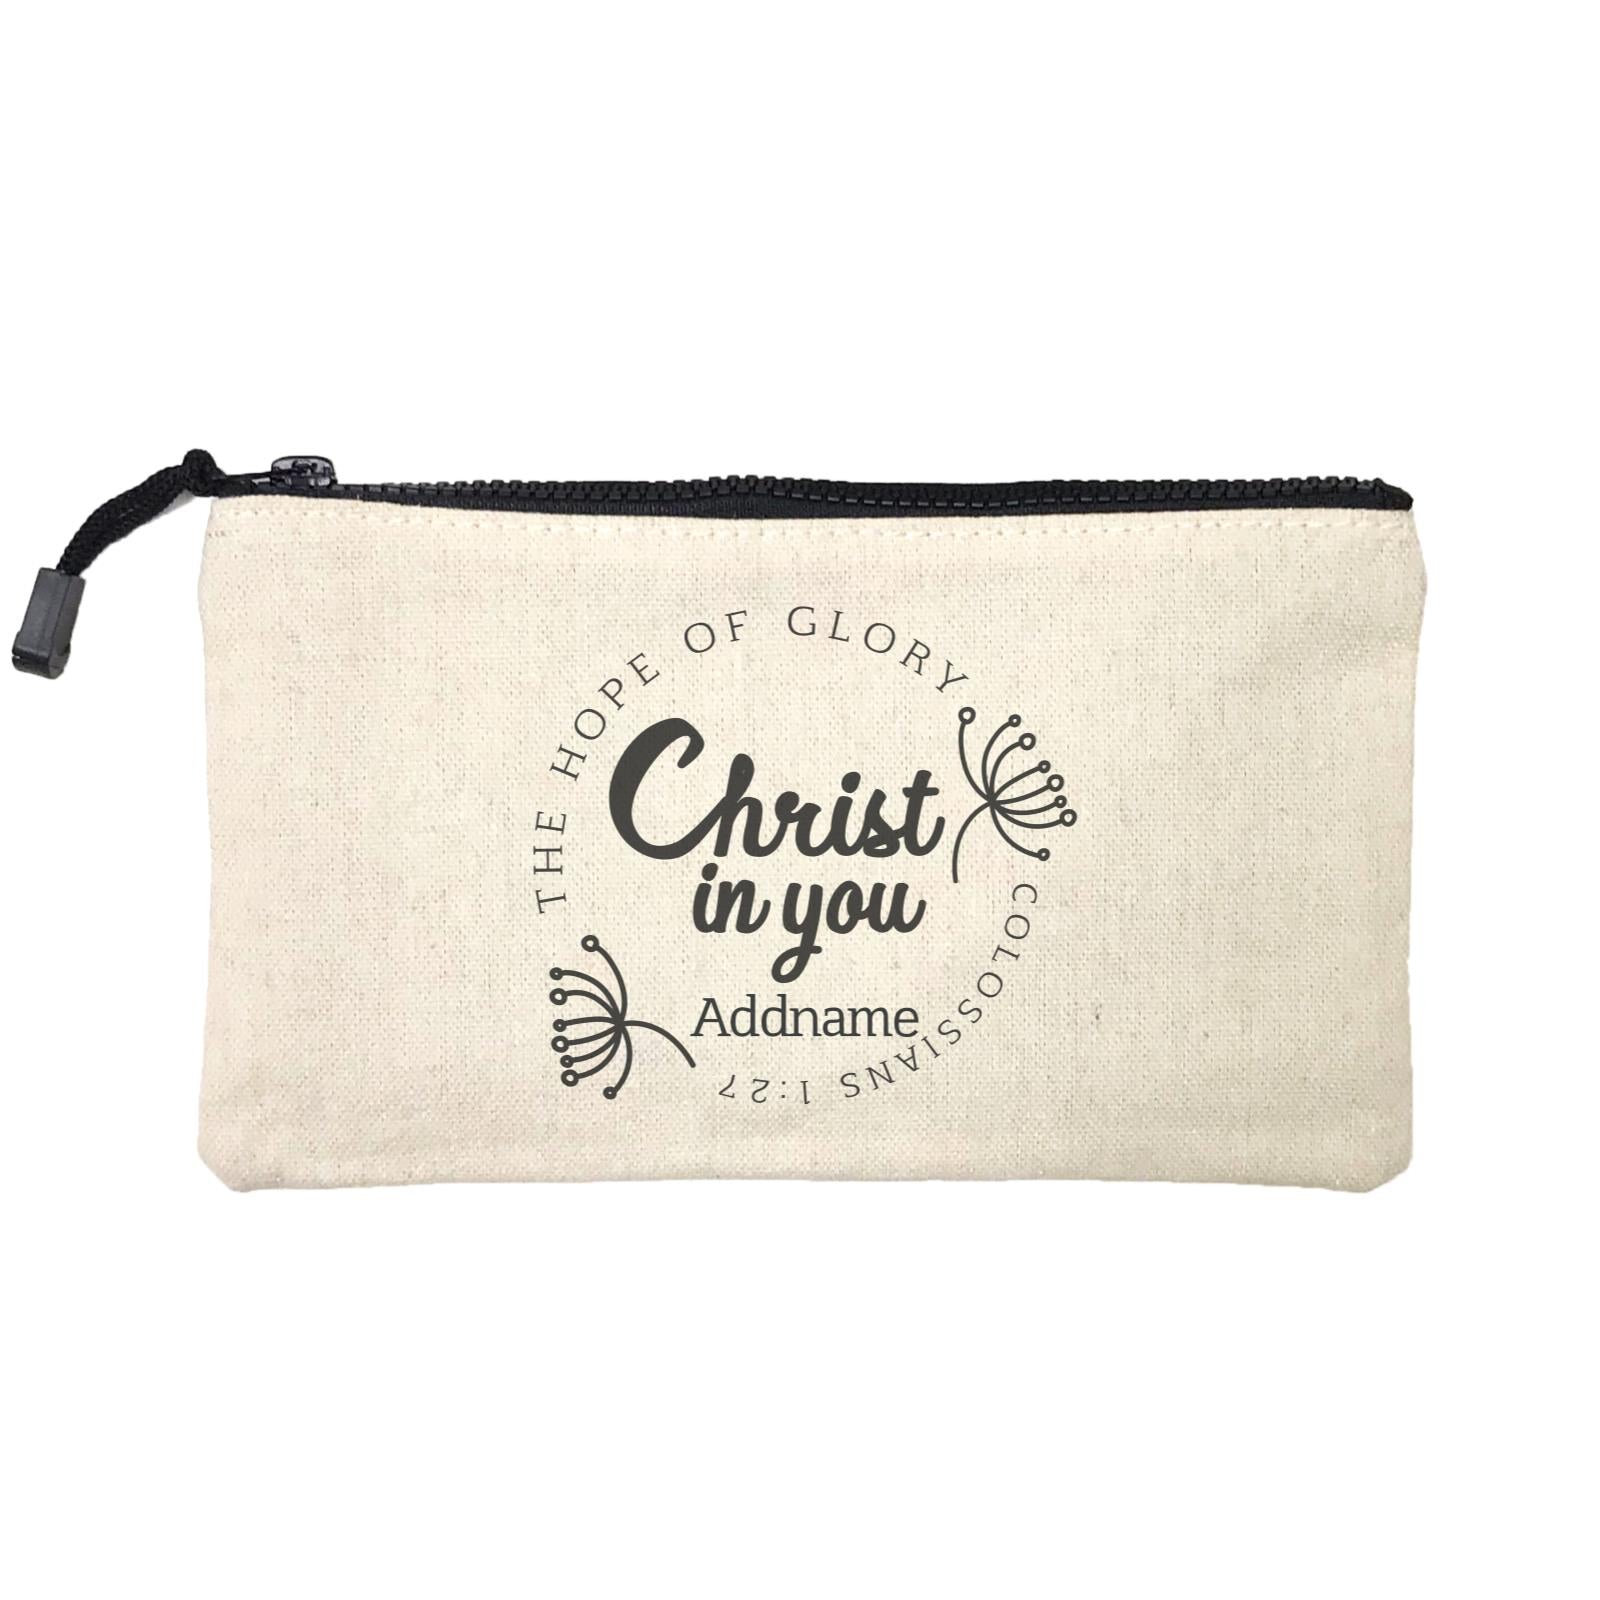 Christian Series The Hope Of Glory Christ In You Colossians 1.27 Addname Mini Accessories Stationery Pouch